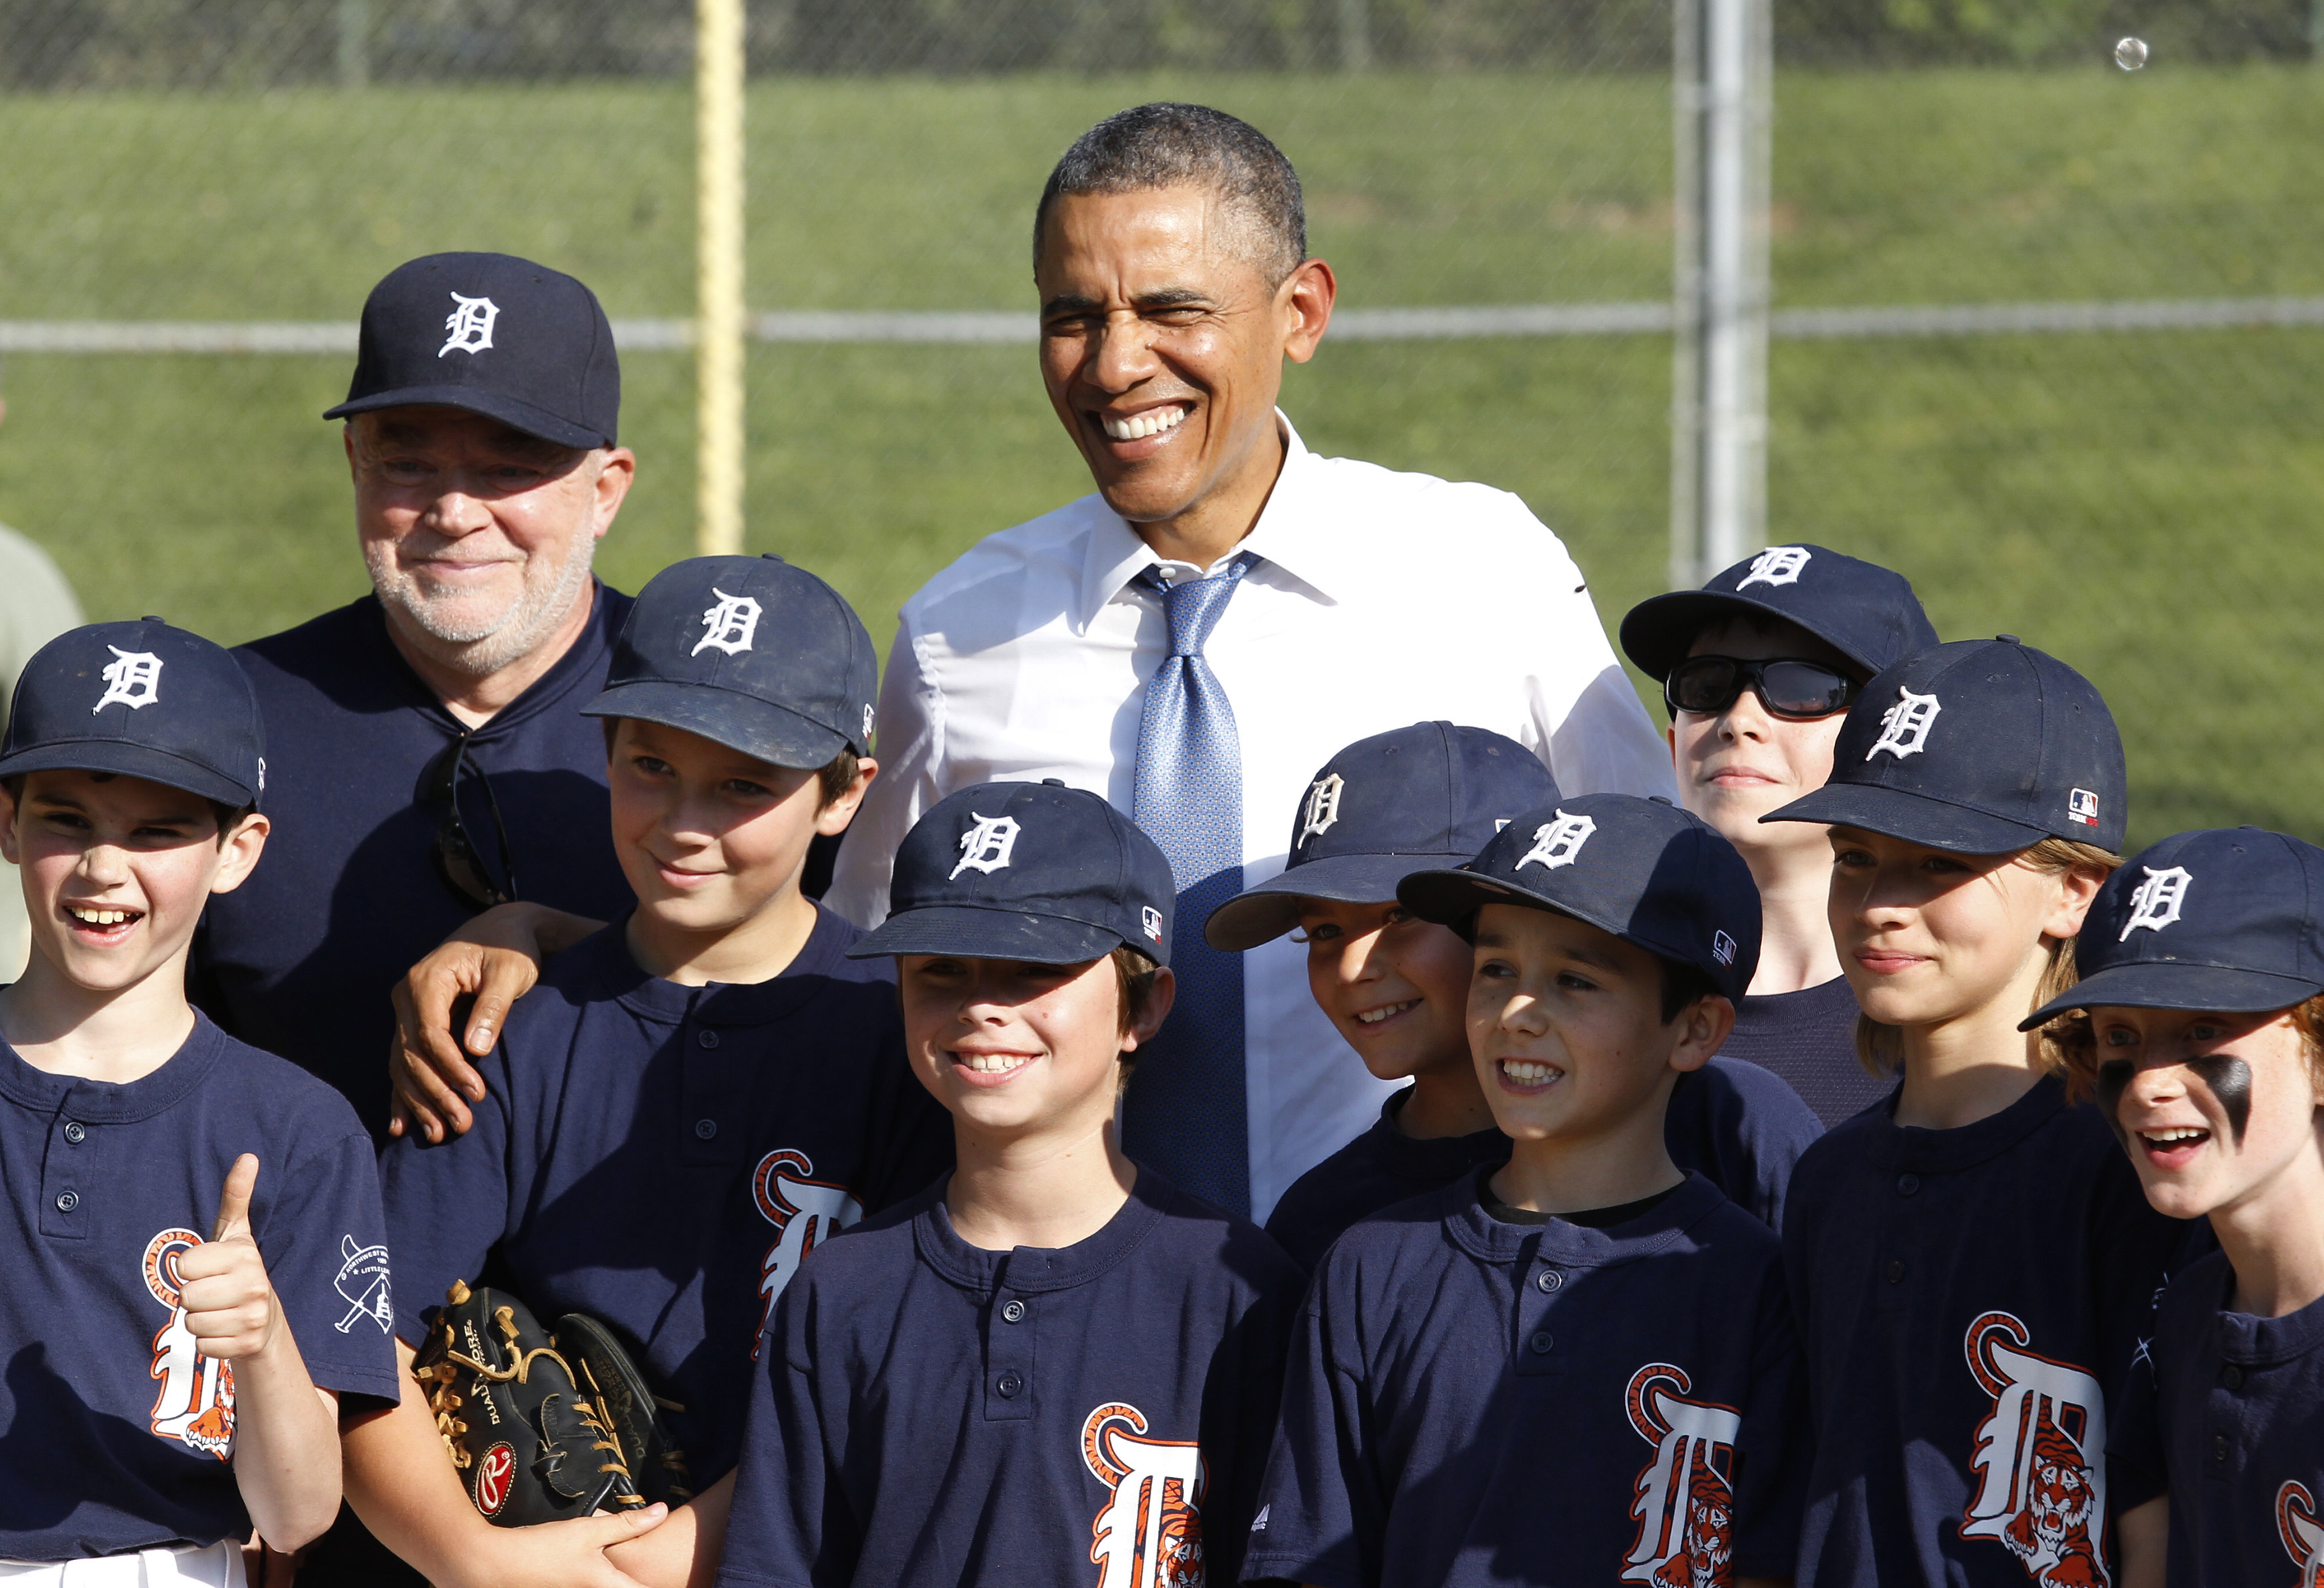 Obama Showed Up At My Little League Game